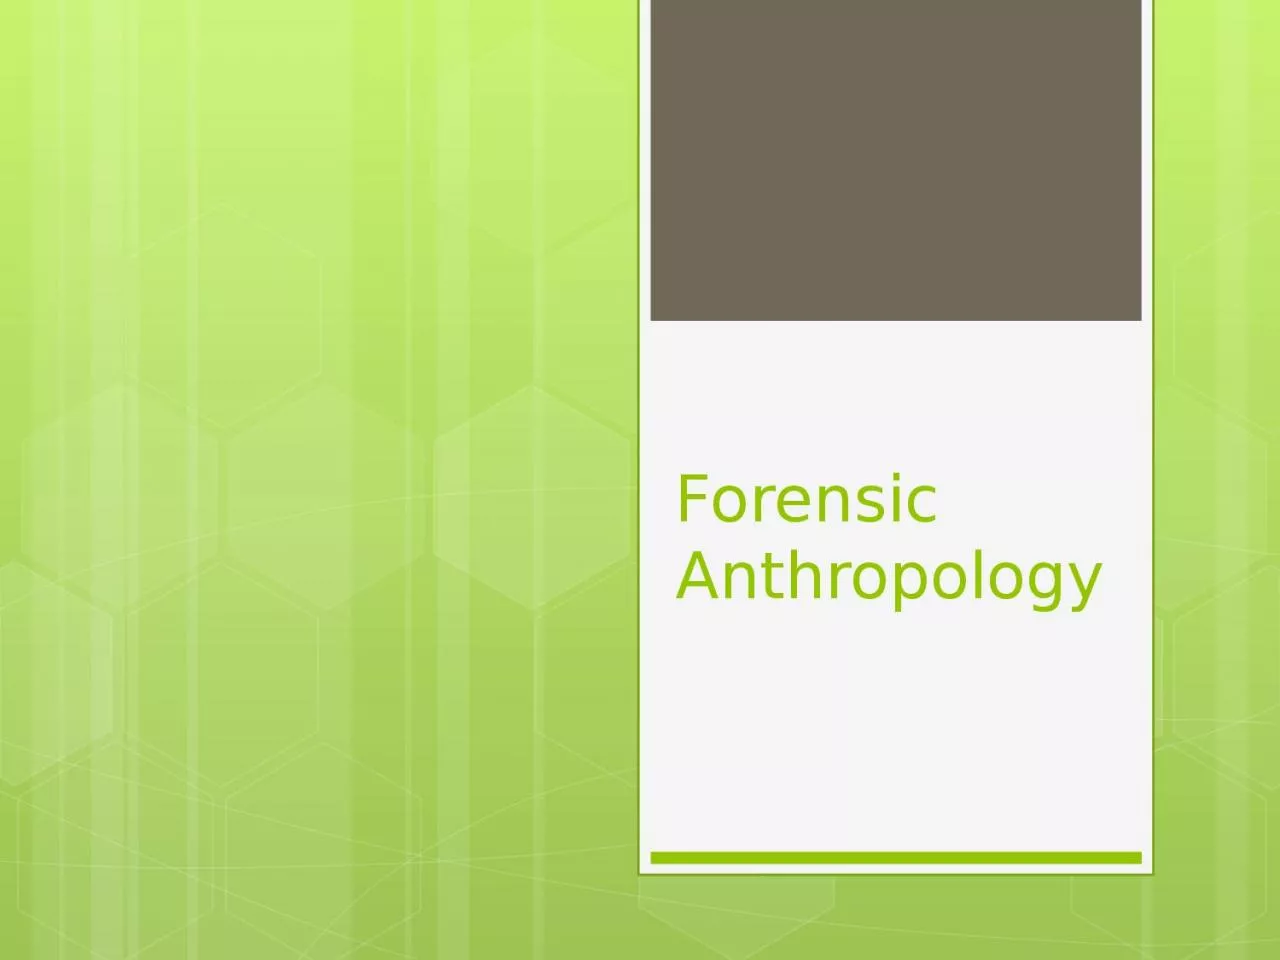 Forensic Anthropology What is Anthropology and Forensic Anthropology?